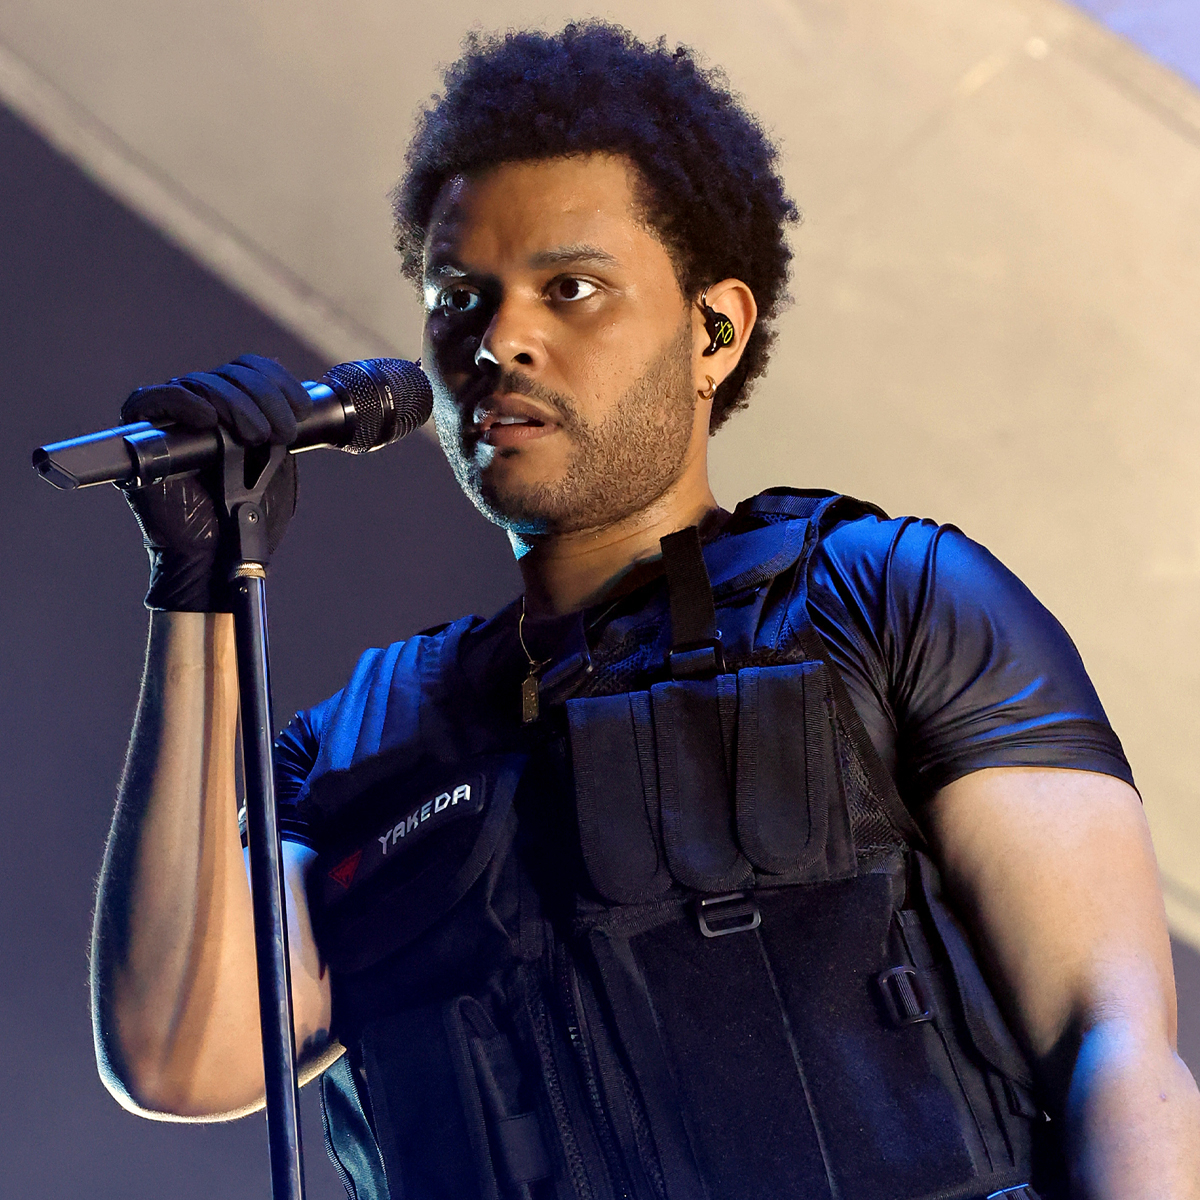 https://akns-images.eonline.com/eol_images/Entire_Site/202244/rs_1200x1200-220504144346-1200-The-Weeknd.jpg?fit=around%7C1200:1200&output-quality=90&crop=1200:1200;center,top